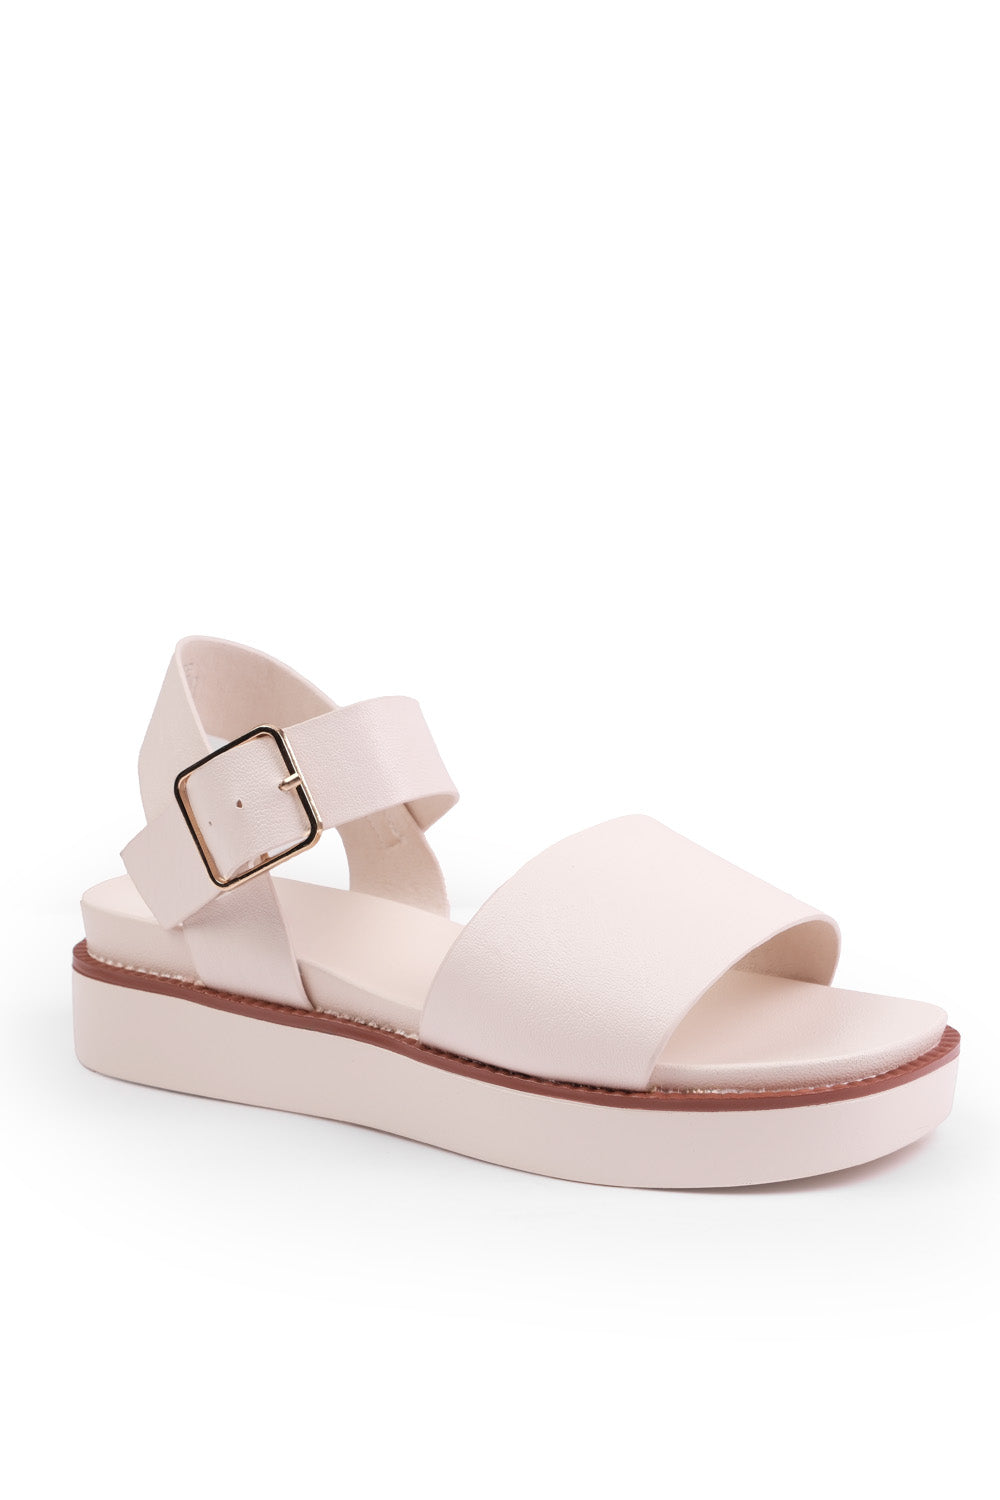 PHOENIX WIDE FIT CLASSIC FLAT SANDALS WITH STRAP AND BUCKLE DETAIL IN CREAM FAUX LEATHER